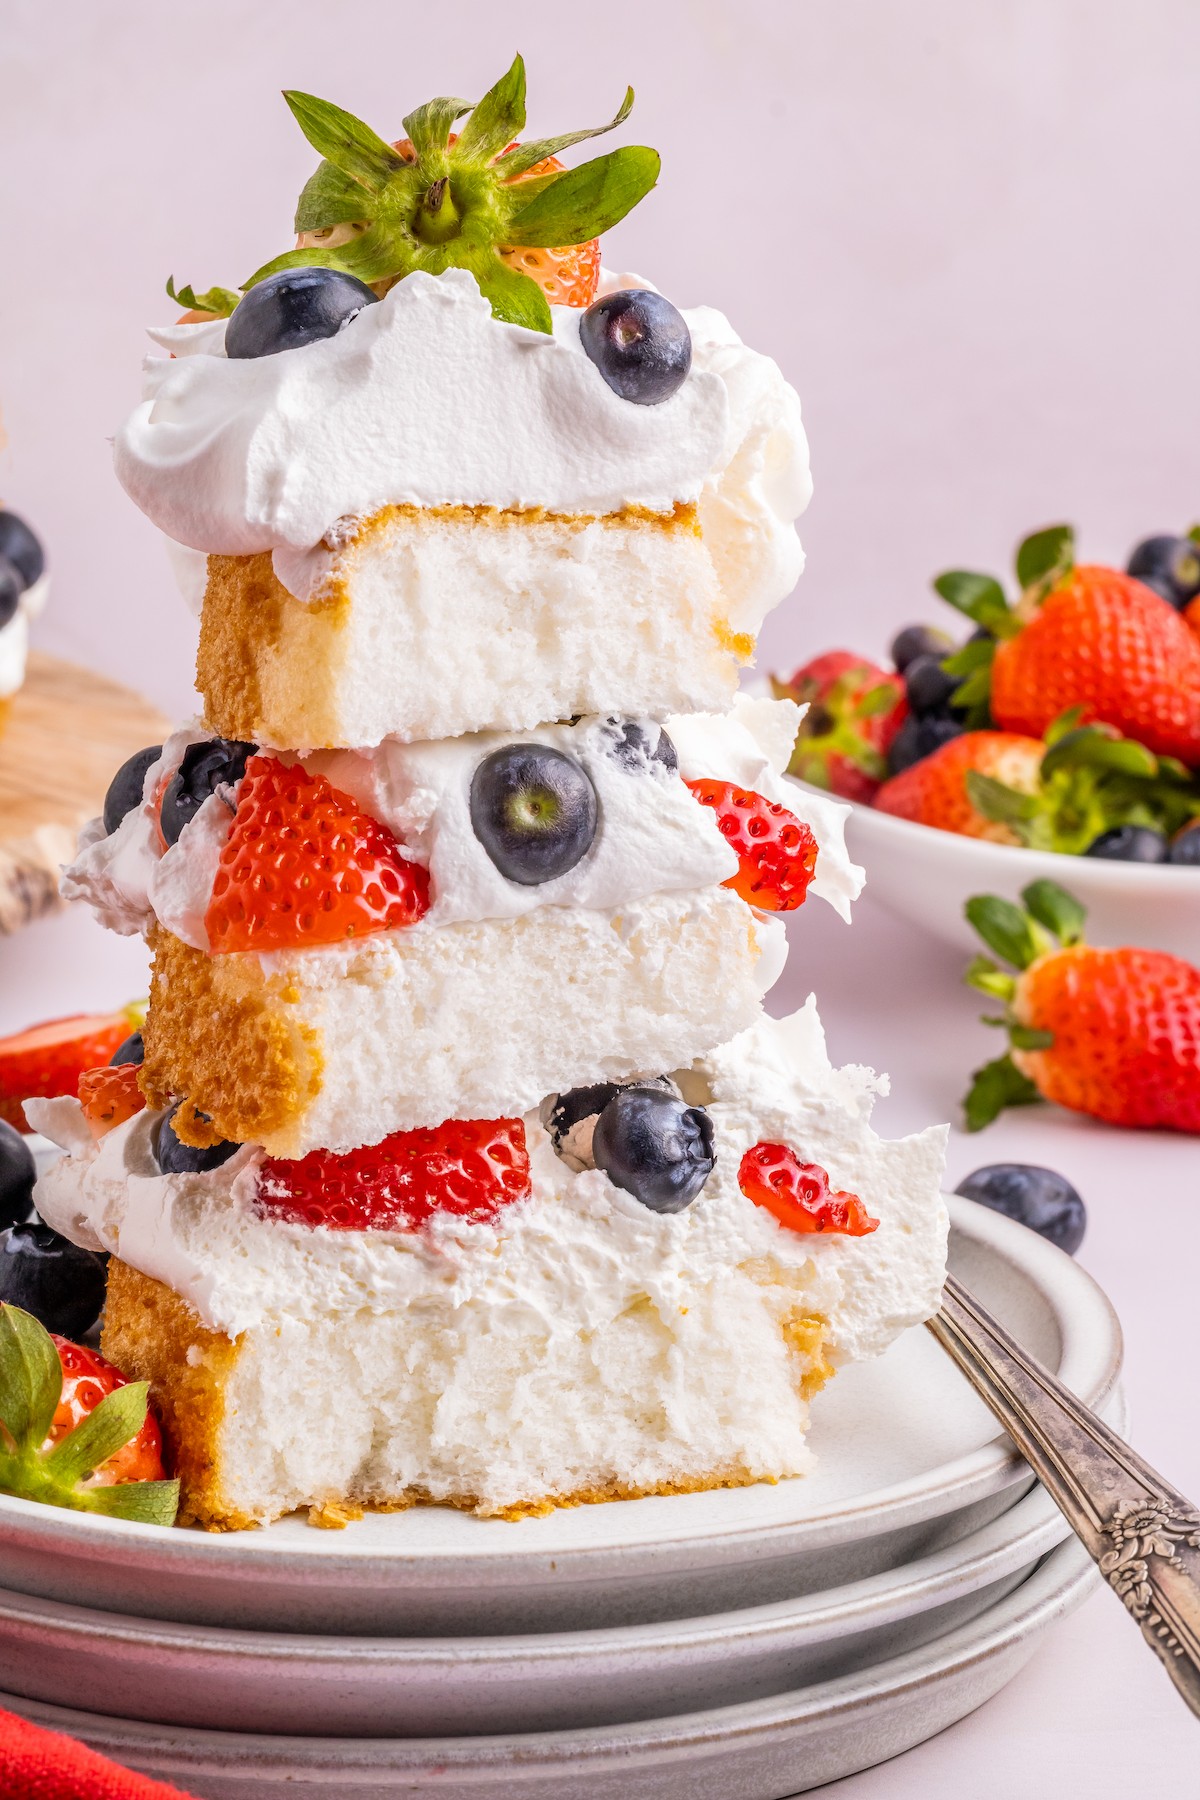 A tall, stacked dessert with whipped cream, berries, and cake.